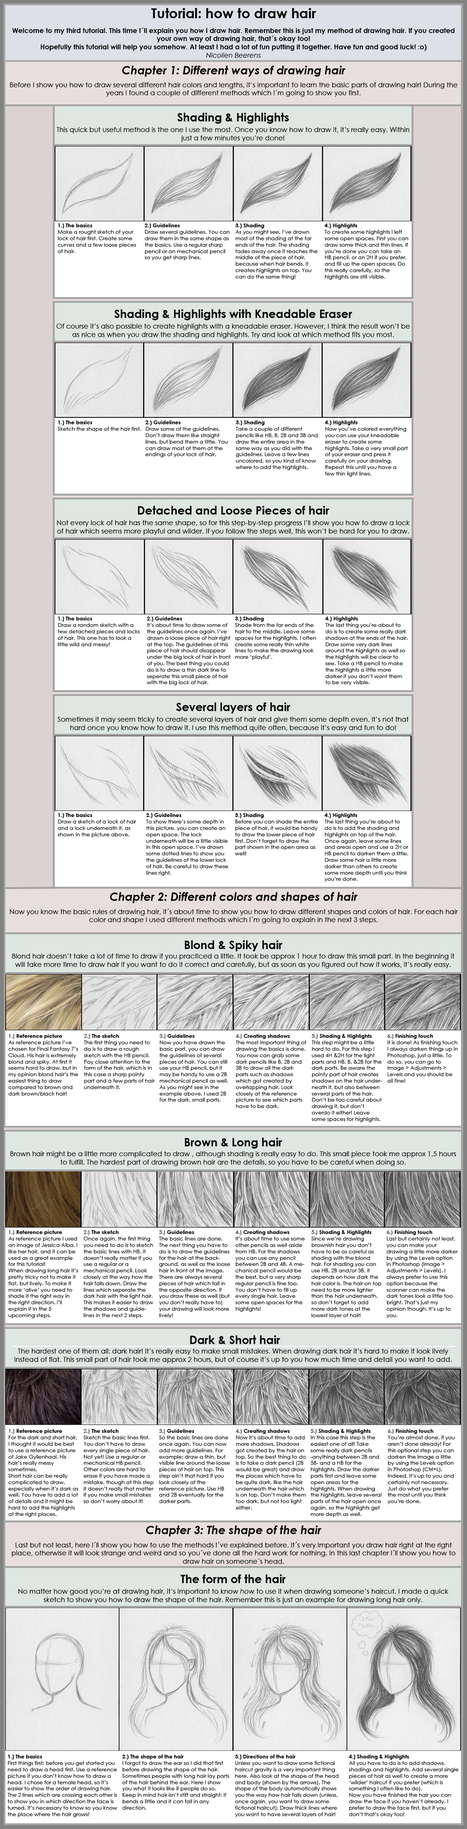 How to Draw Hair | Drawing and Painting Tutorials | Scoop.it